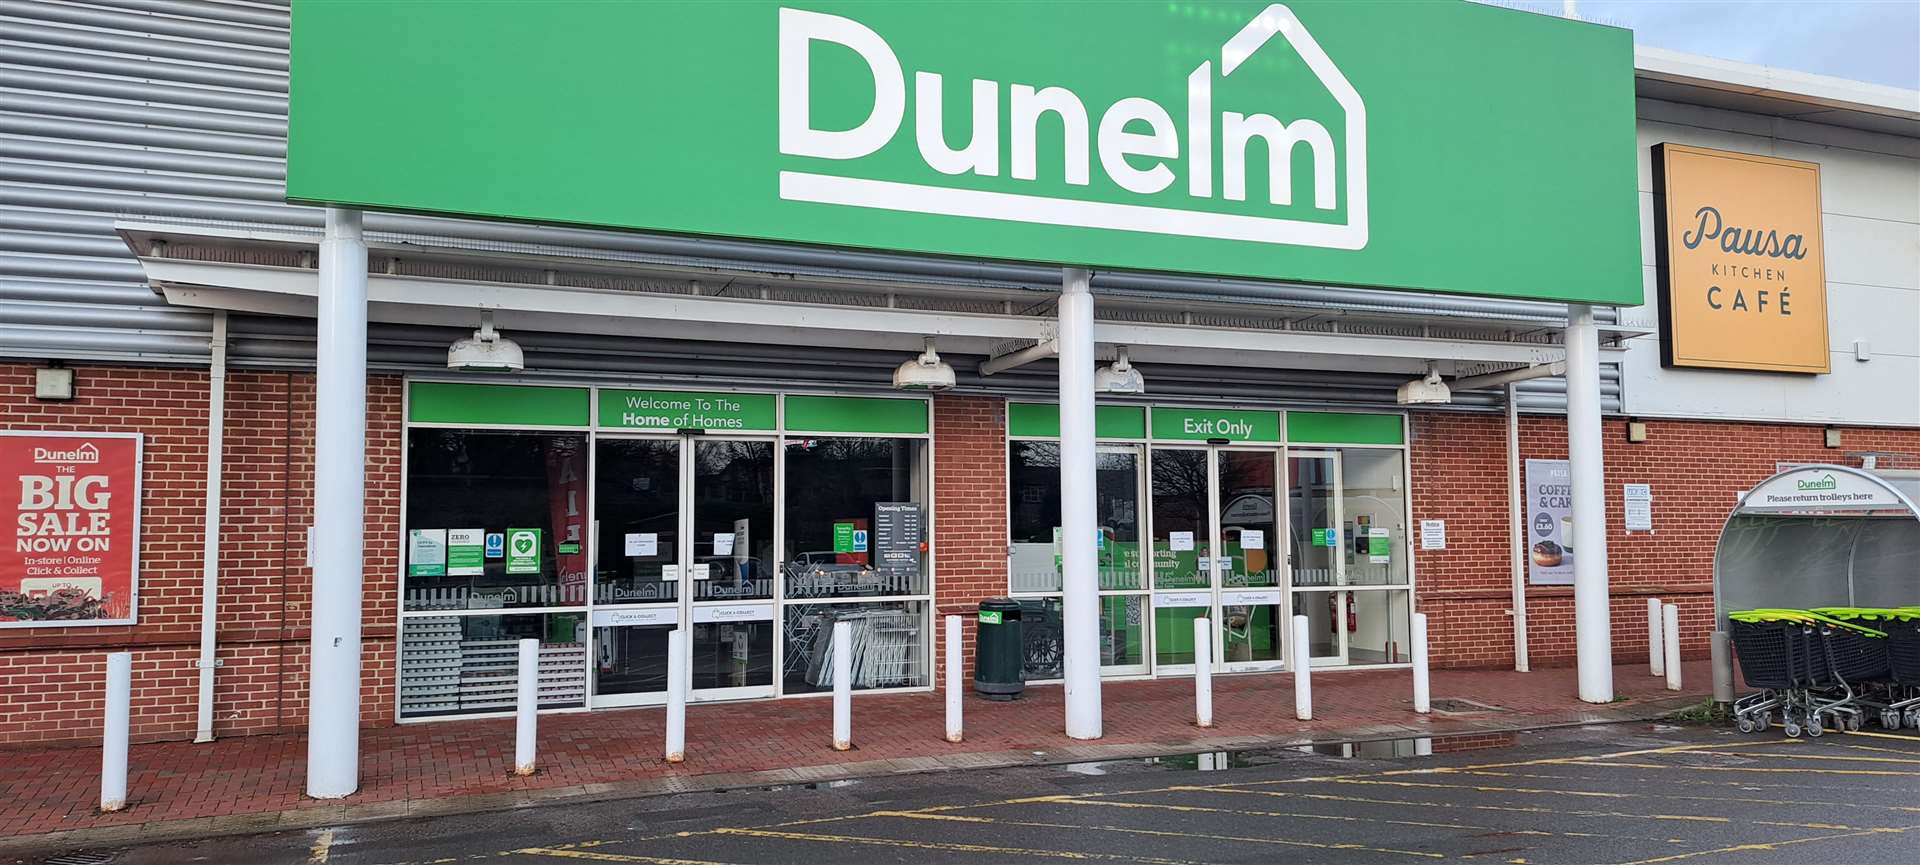 The Dunelm store has been closed since 11am